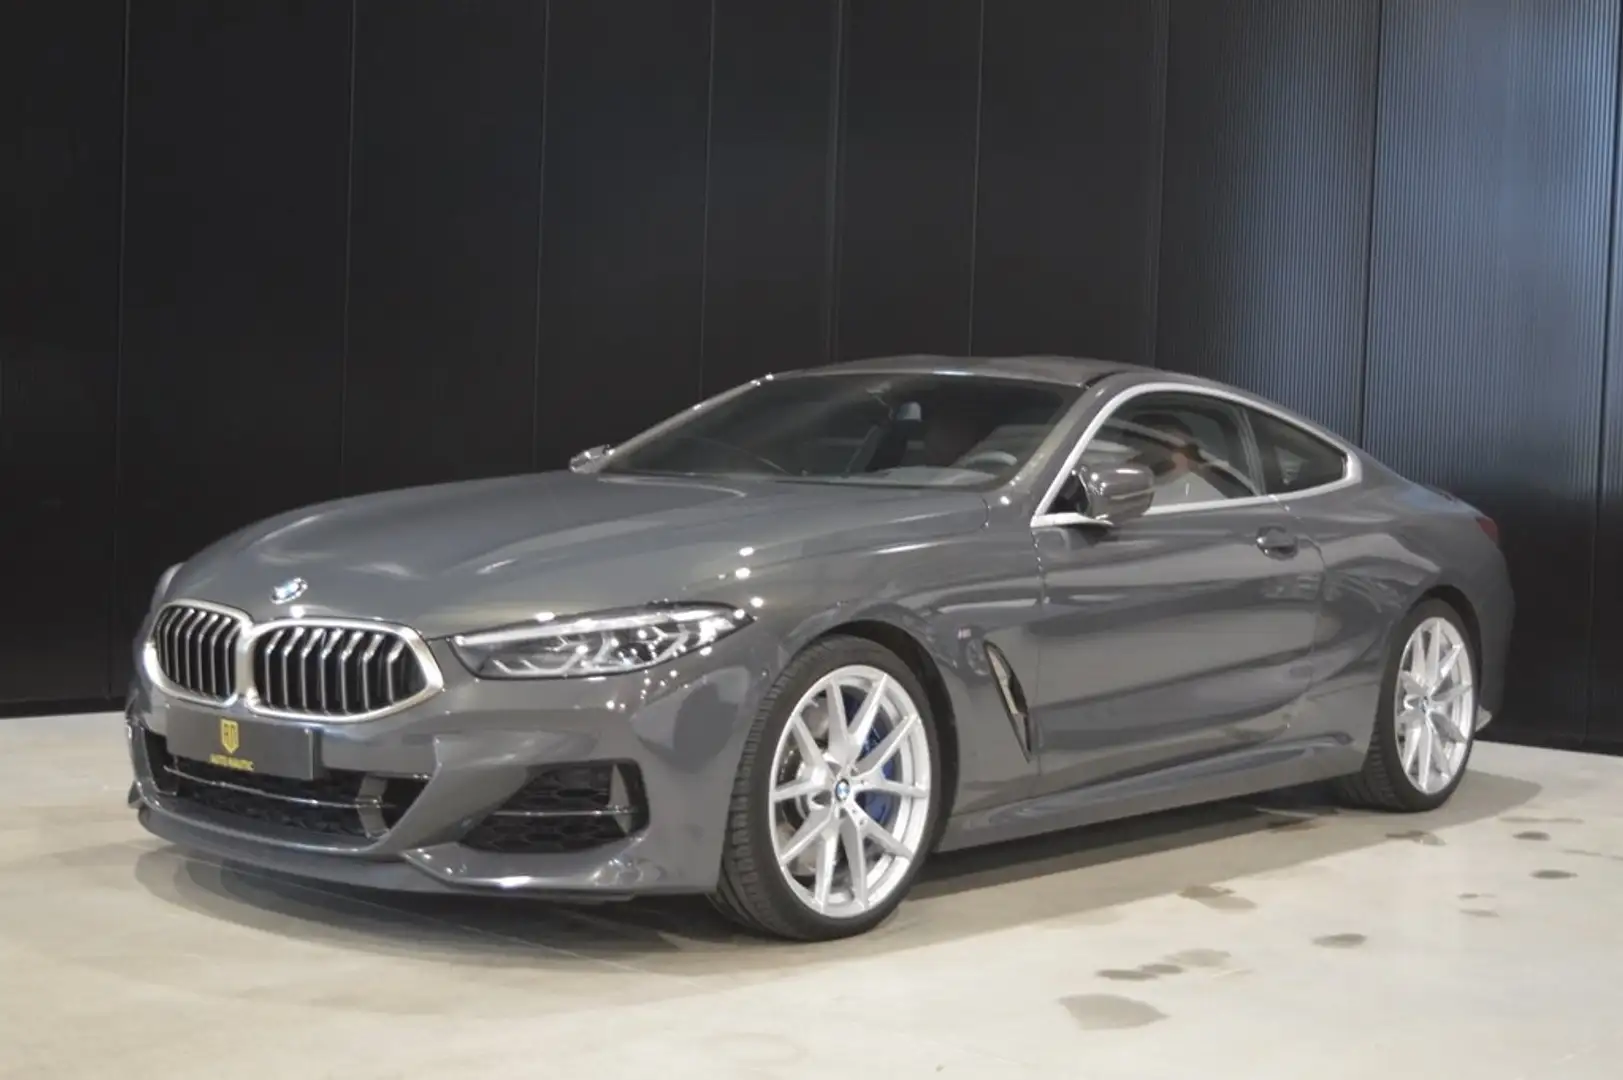 BMW 850 i xdrive 64.000 km ! Carbon pack ! Top condition ! siva - 1